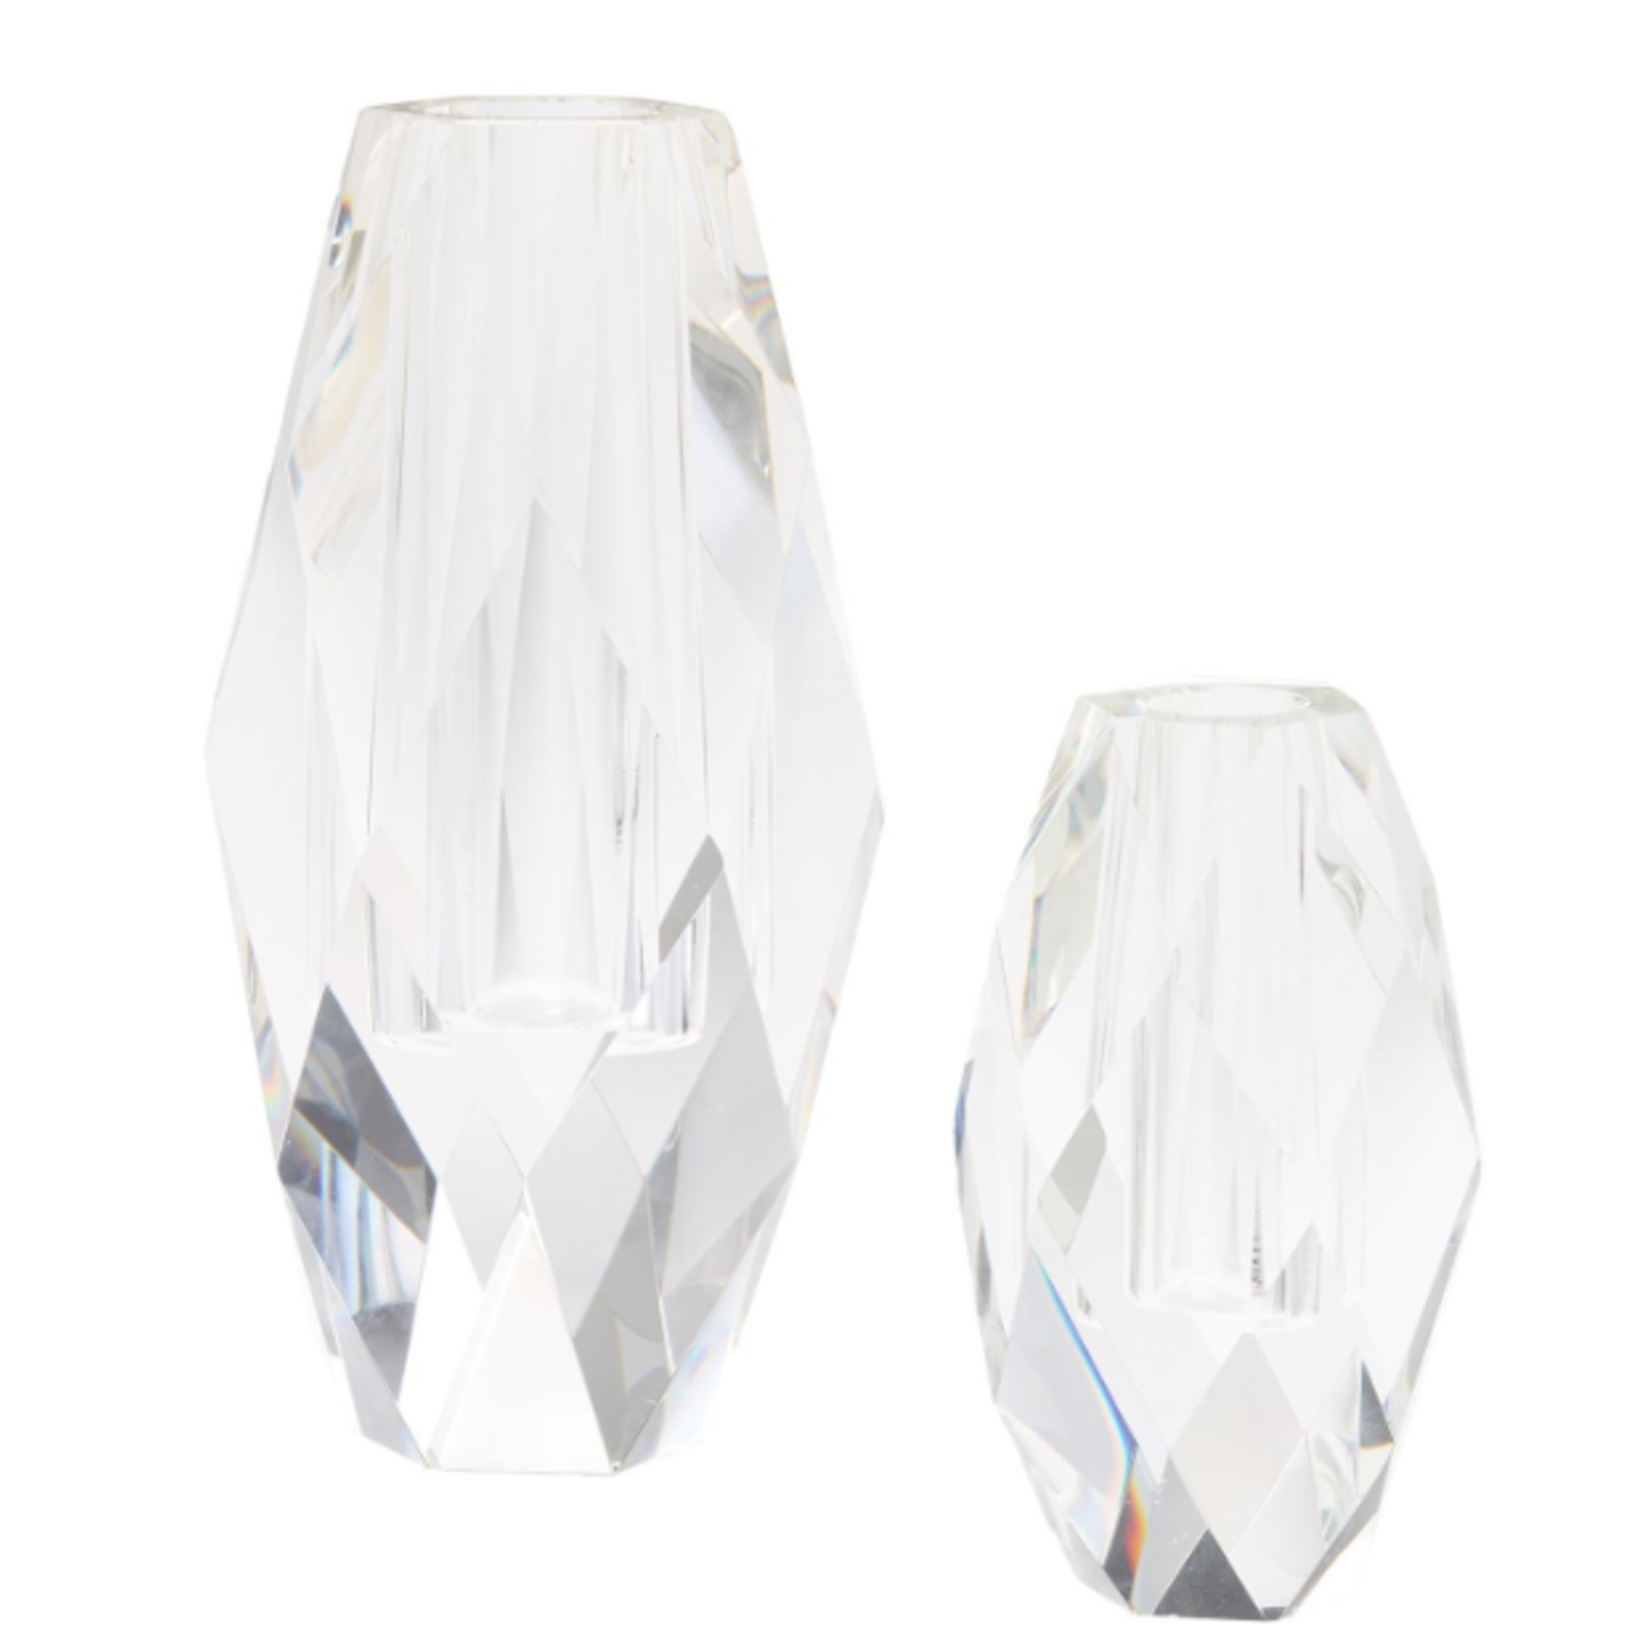 Two's Company Faceted Crystal Vase Set of 2